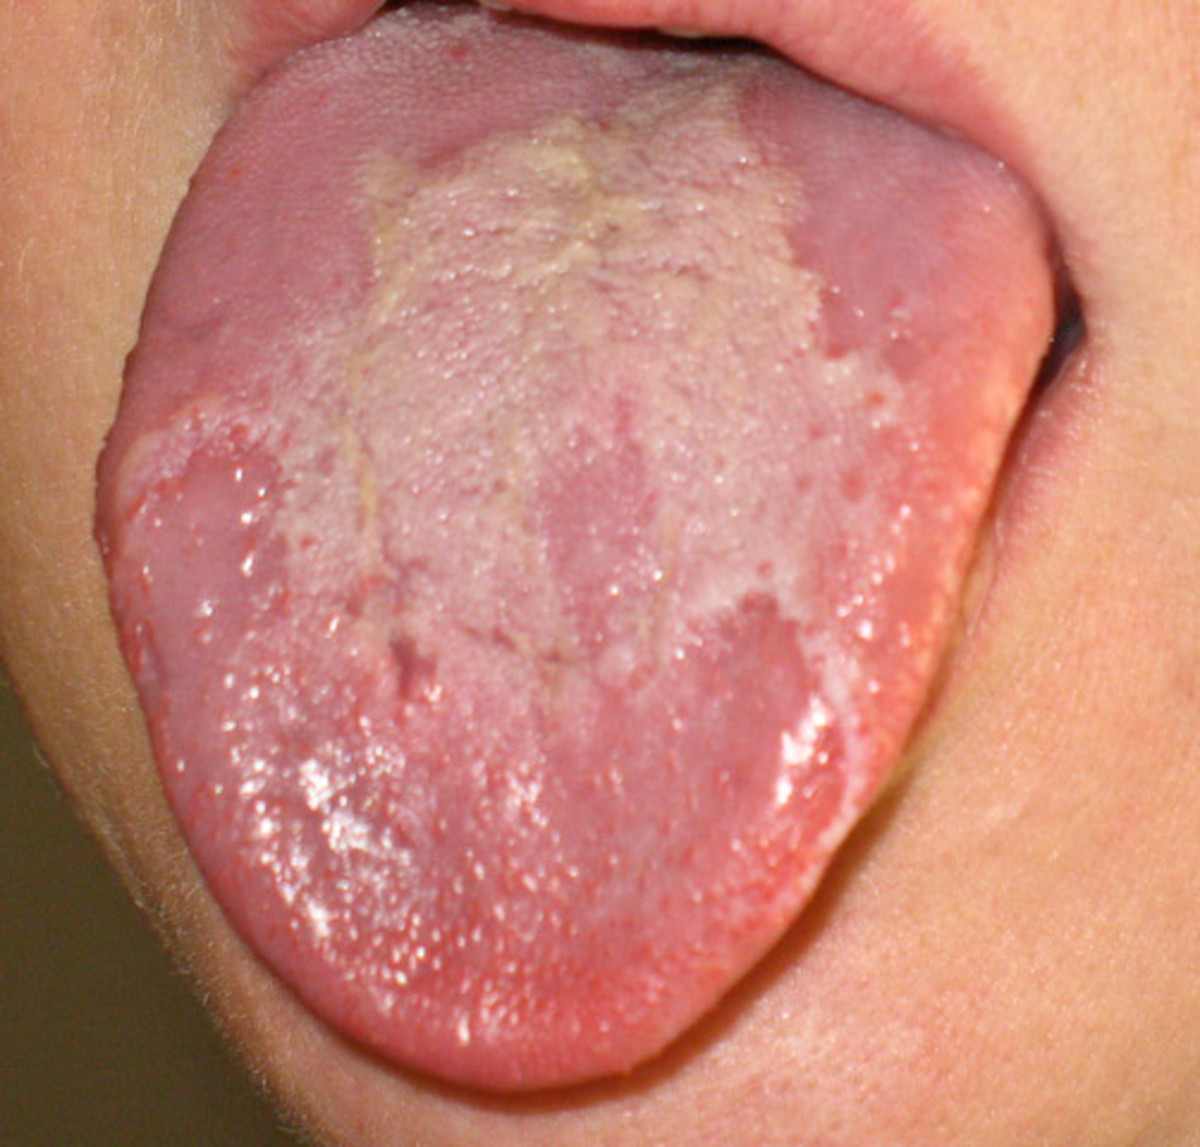 Baby's Tongue: Is It Thrush or Geographic Tongue?